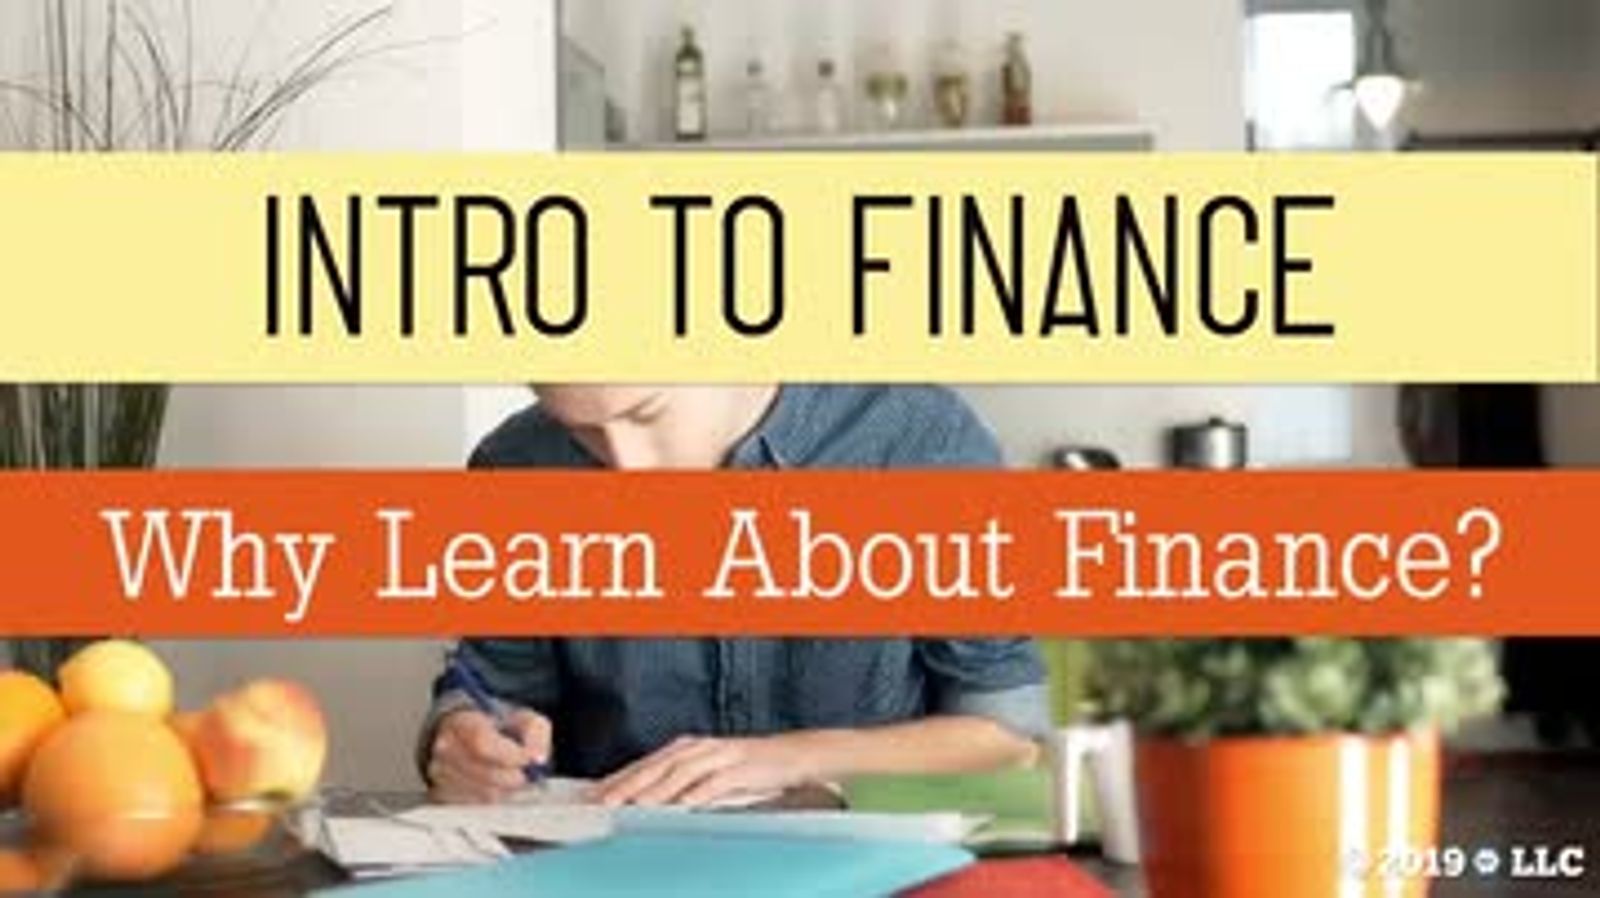 Intro to Finance: 01. Why Learn About Finance?